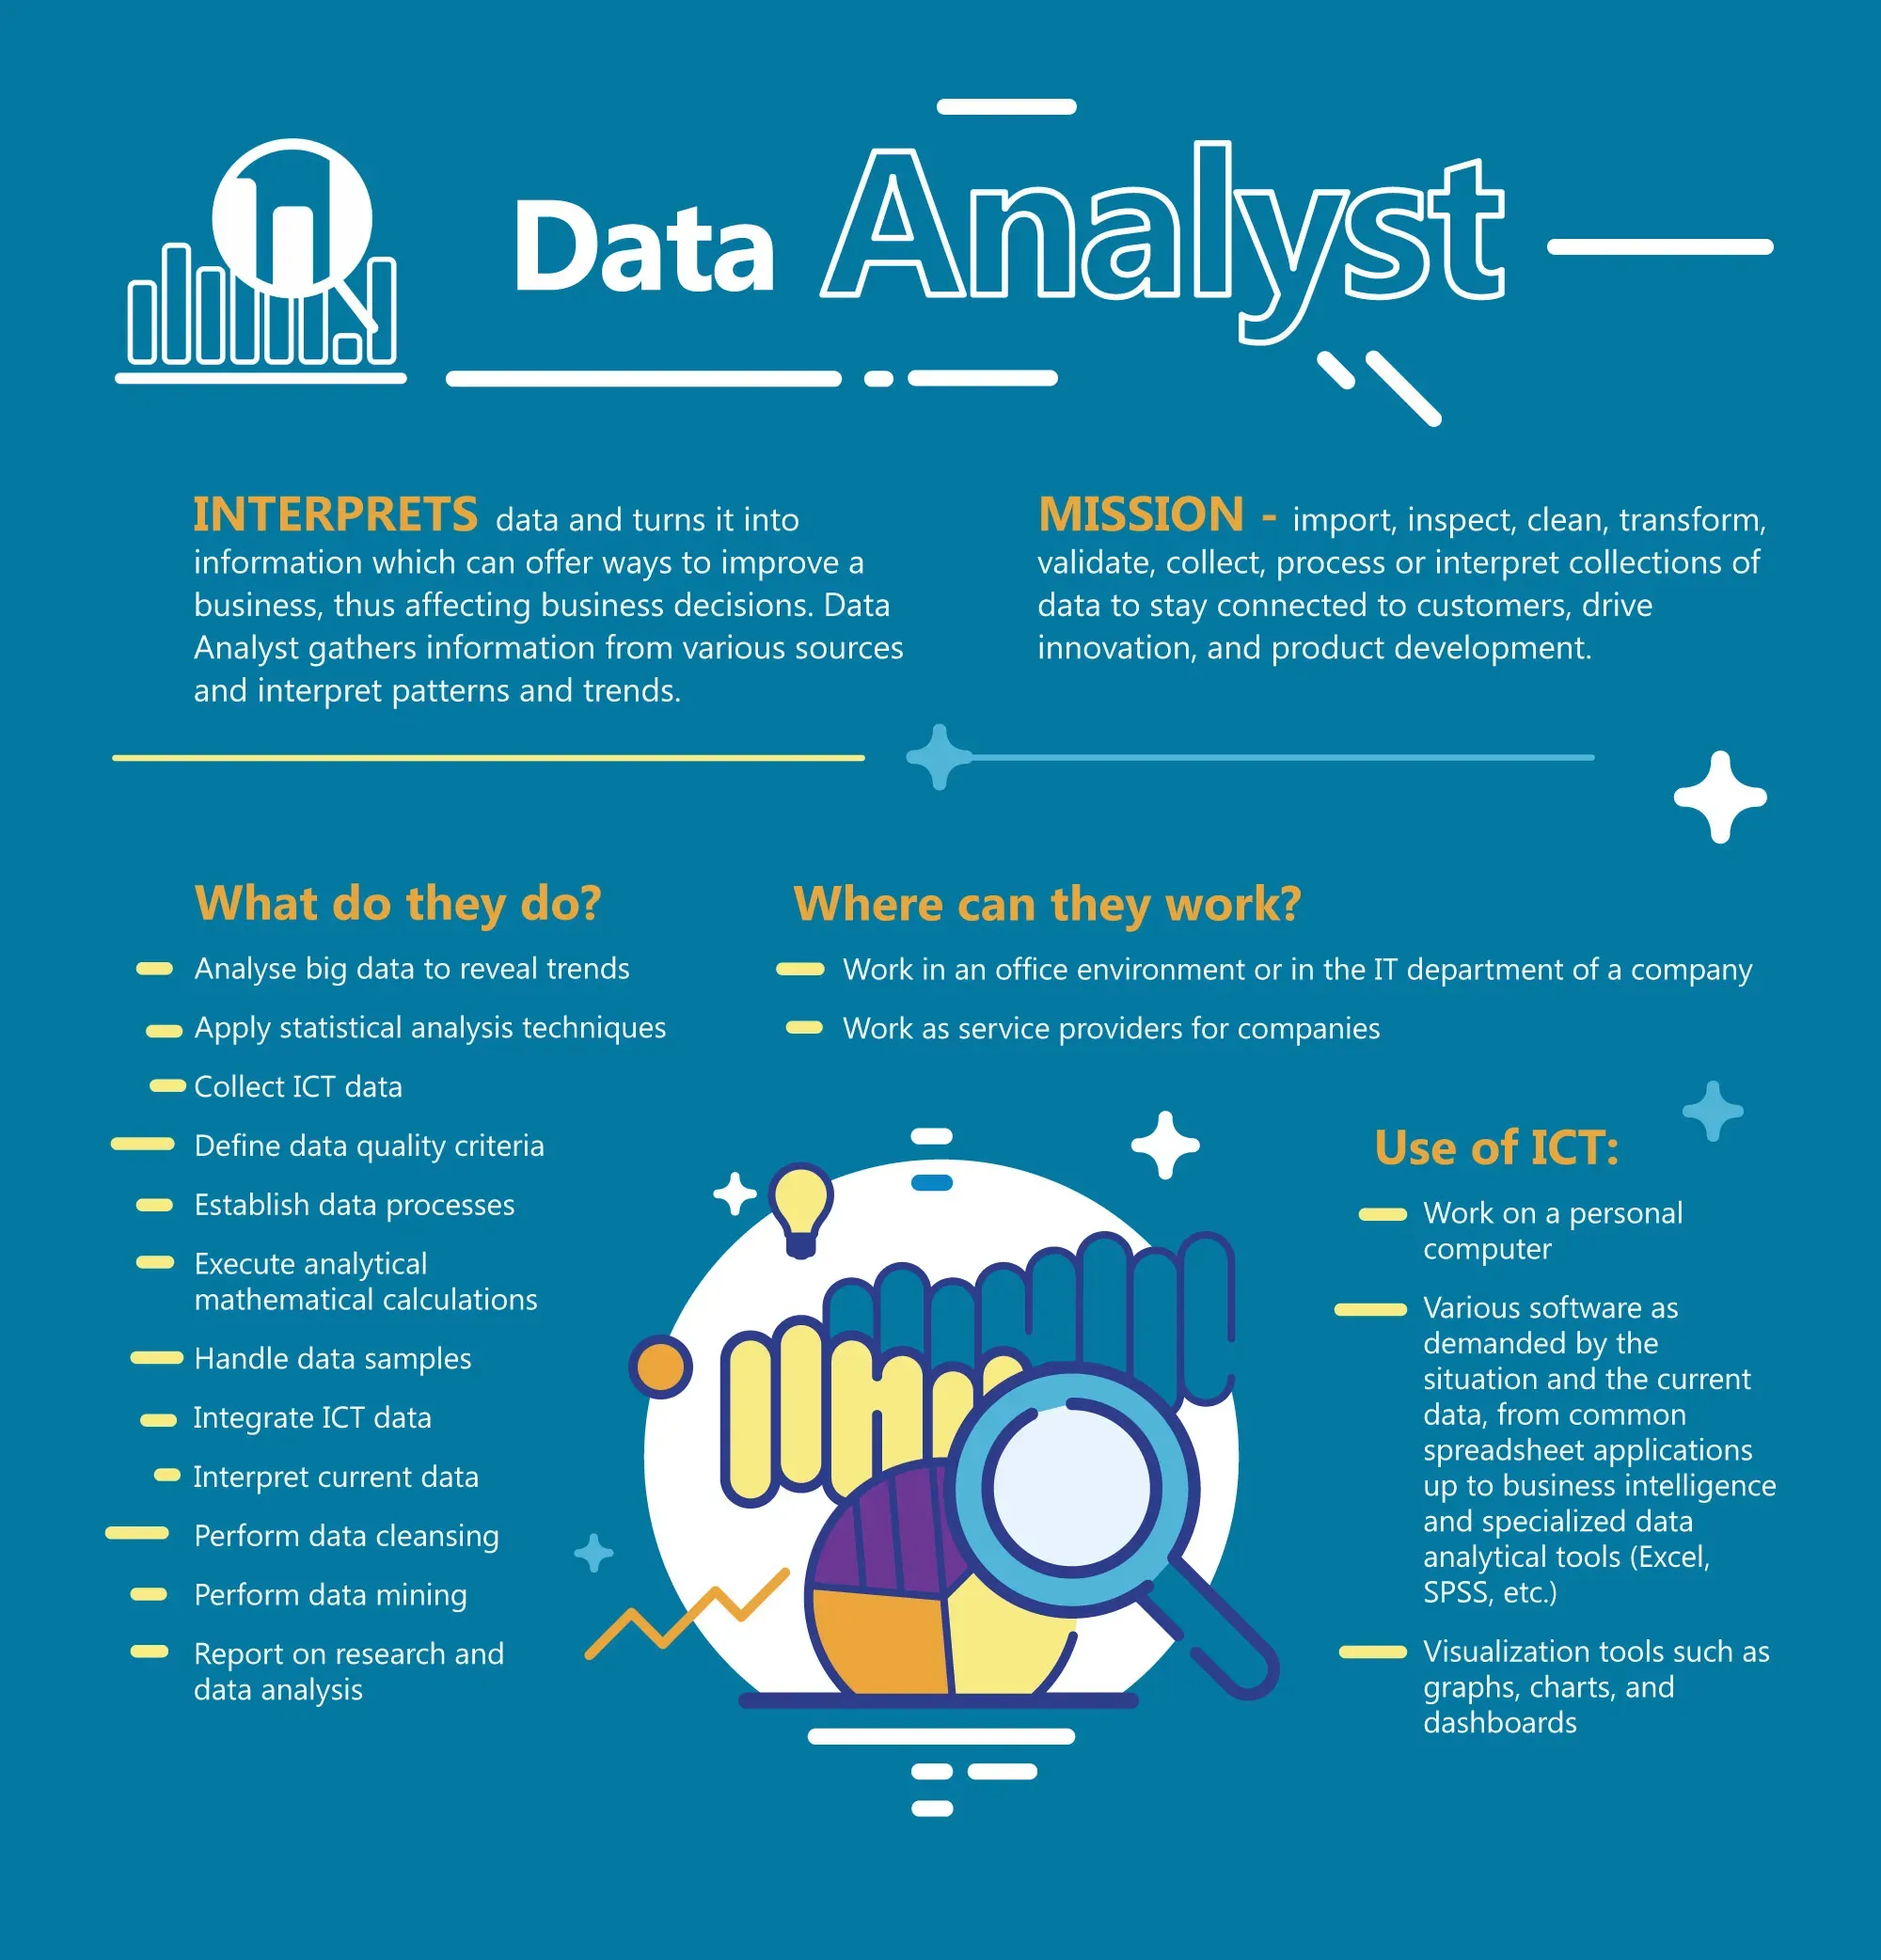 How To Get a Remote Data Analyst Job?